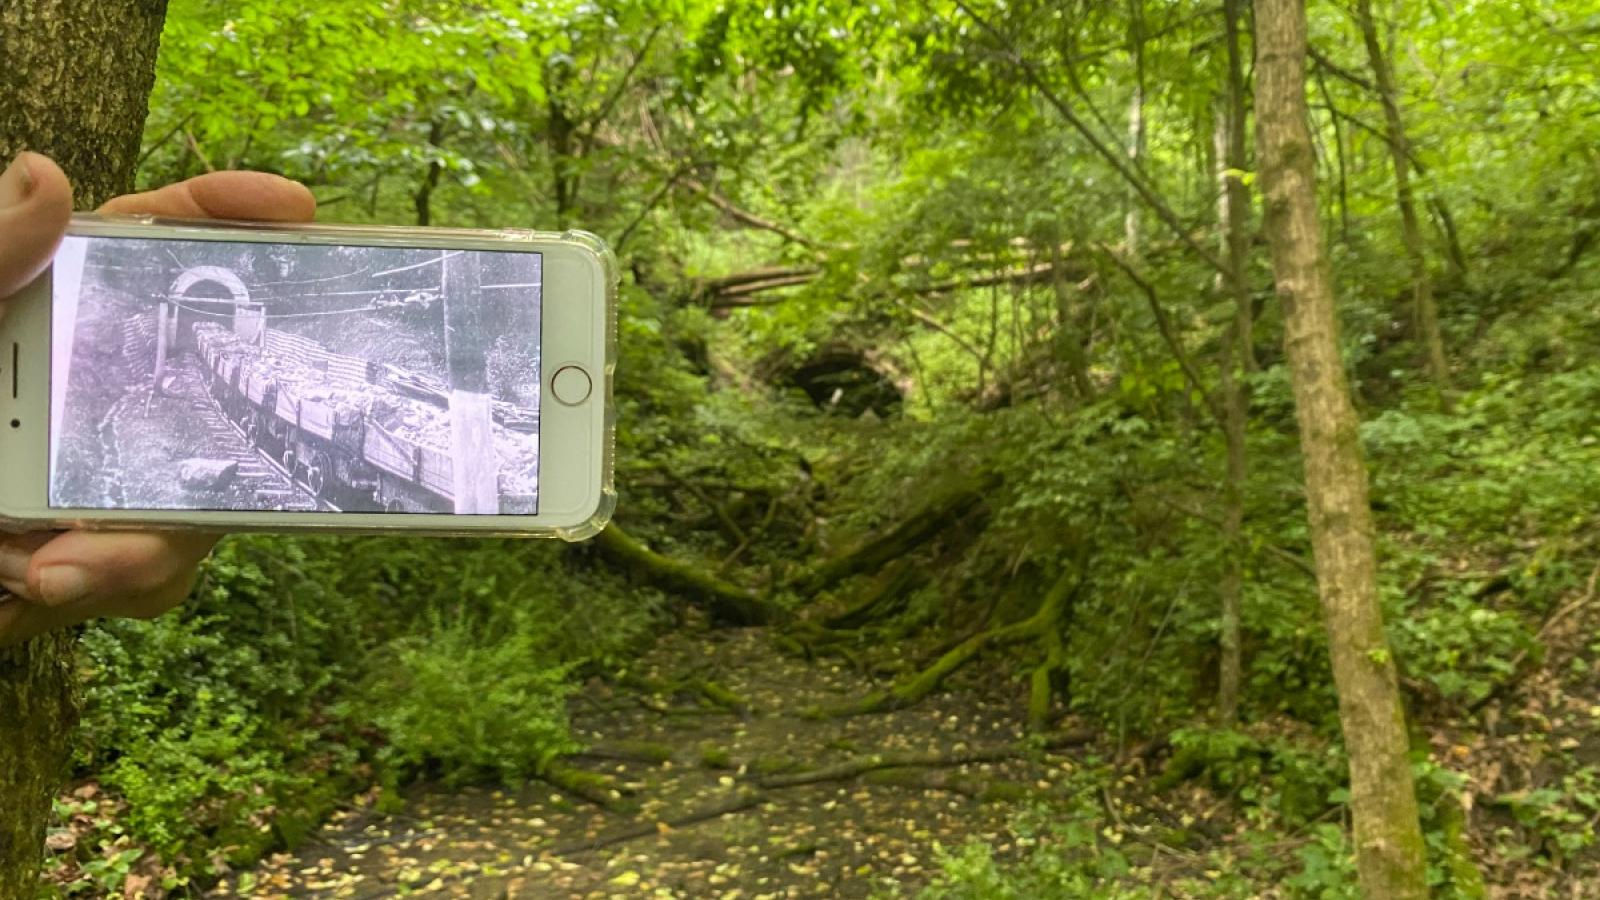 The hand of Pete Crane holding his iPhone which is displaying a black and white photo of the Haydenville tunnel when it was operating, carts coming in/out of its well-defined tracks. To the right of this photo is the old Haydenville tunnel today, barely visible behind the forest fauna and partially collapsed at the mouth. The train tracks are no longer visible, but it is apparent where the trail used to be.